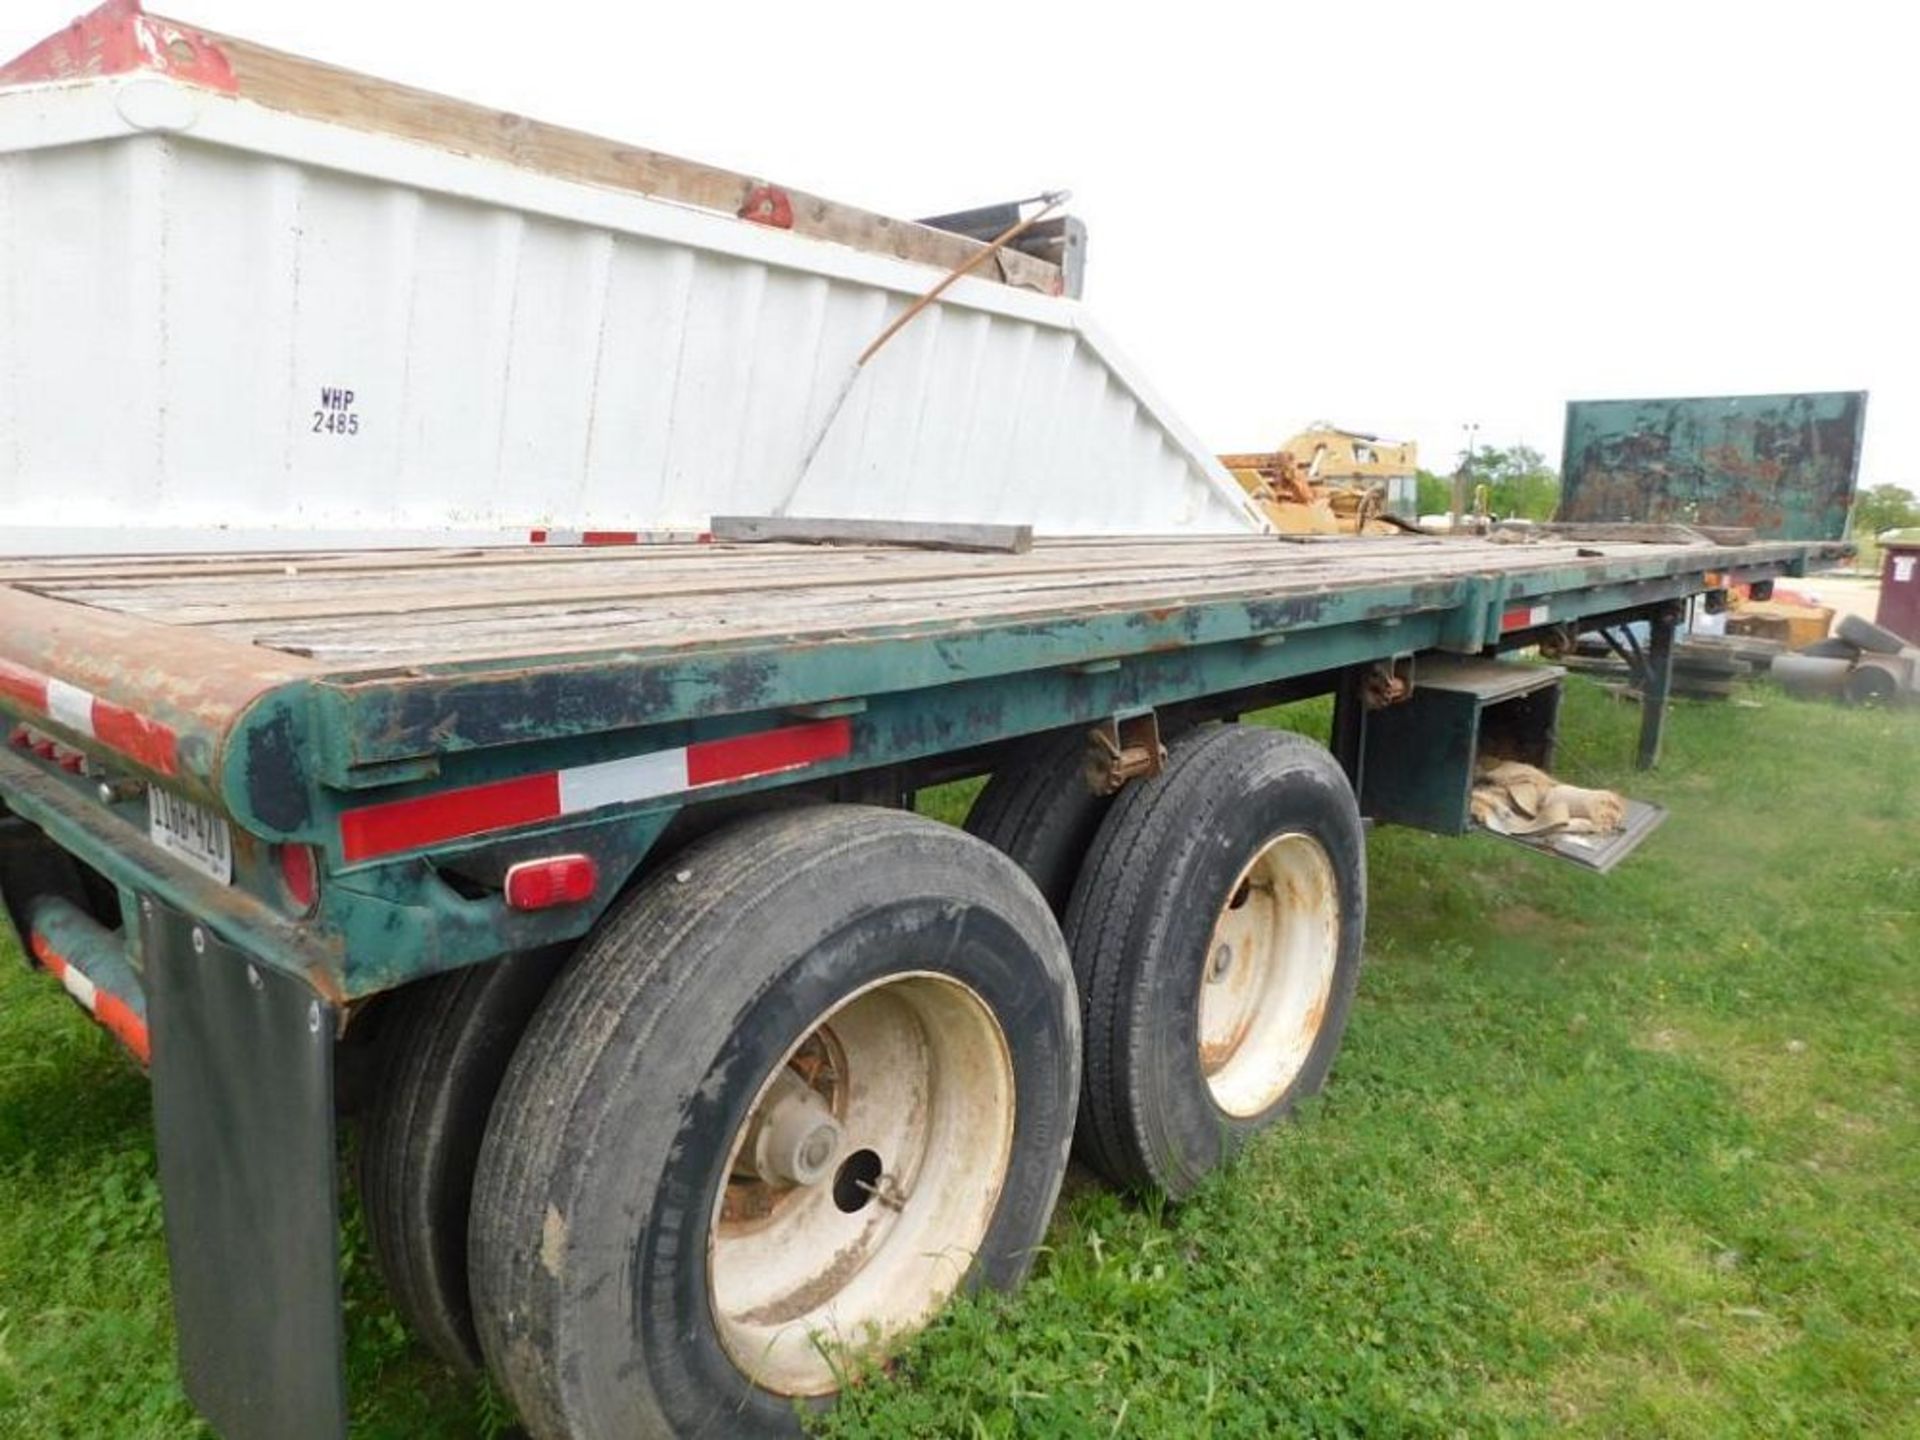 1986 Tandem-Axle Utility Flatbed Trailer, VIN 1UYFS2452GA502603, 40 ft. Long, 96 in. Wide, Wood Deck - Image 2 of 2